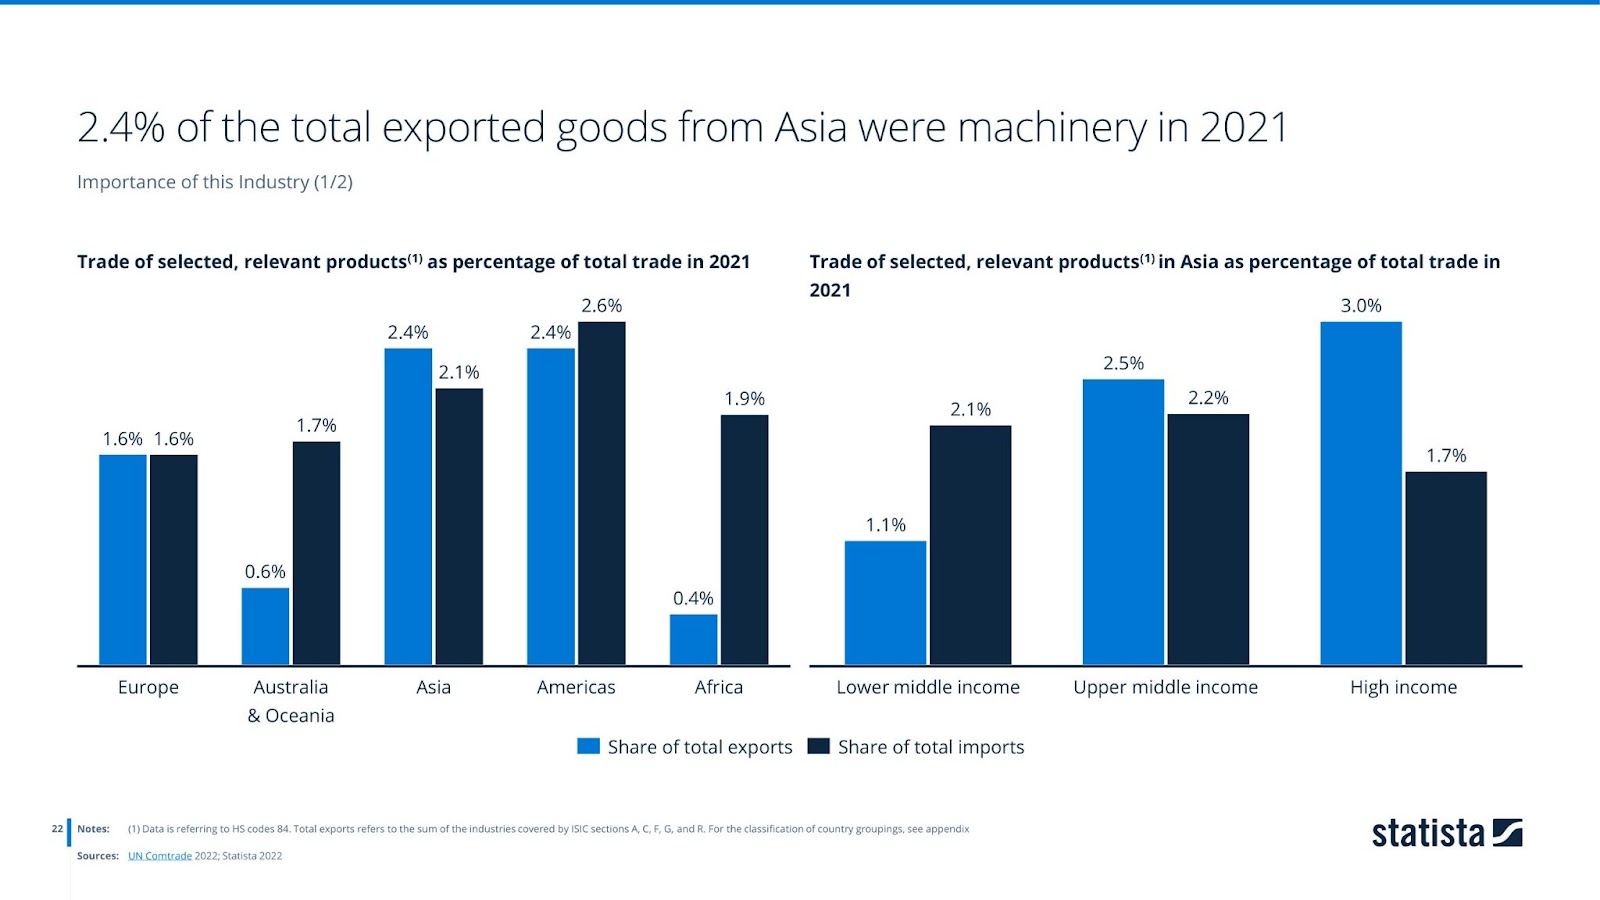 Trade of selected, relevant products in Asia as percentage of total trade in 2021